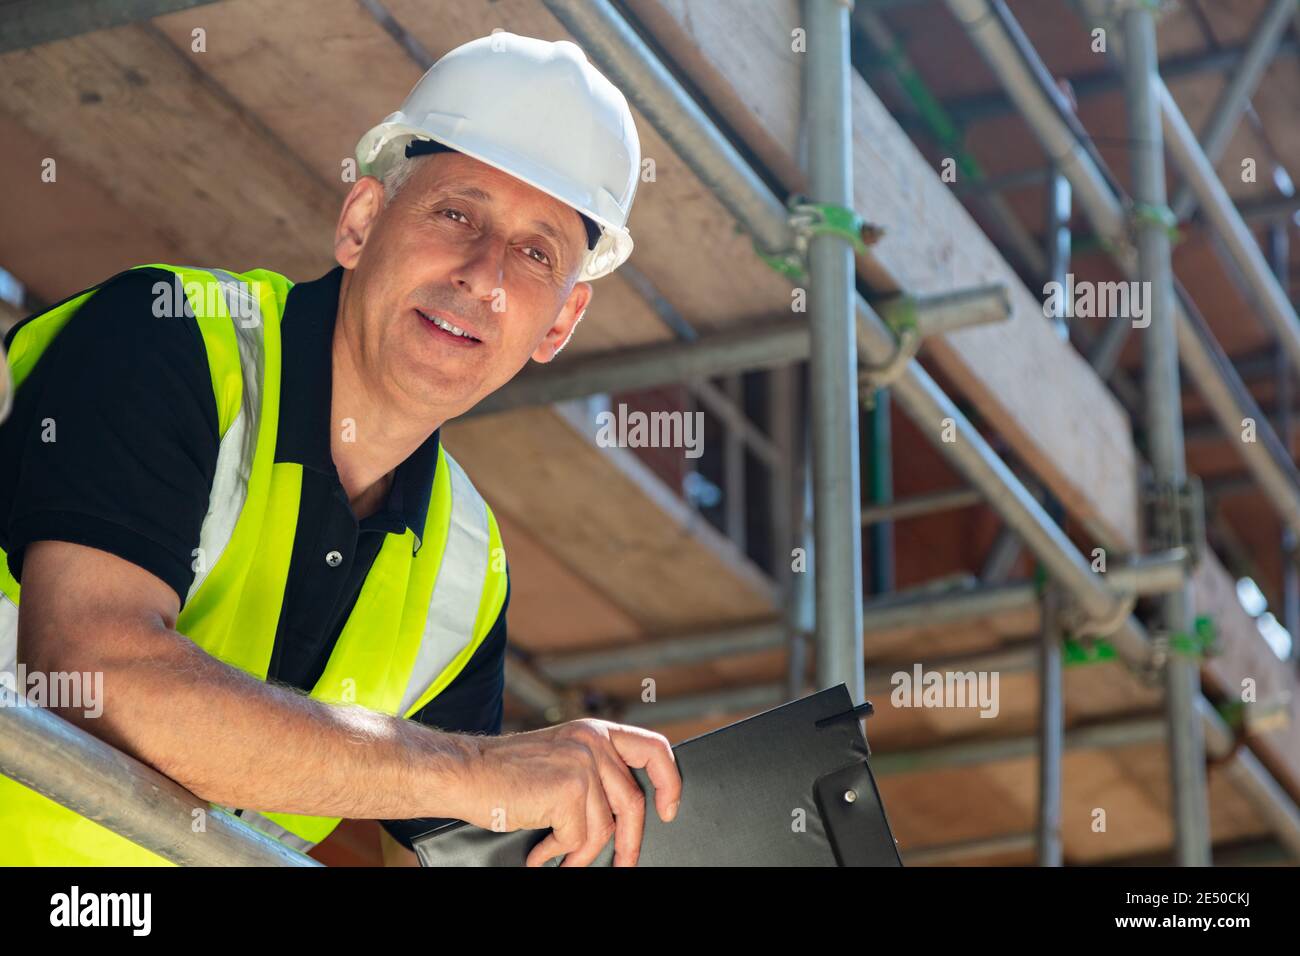 Male builder foreman, construction worker or site manager holding a clipboard, wearing a white hard hat and hi vis vest Stock Photo